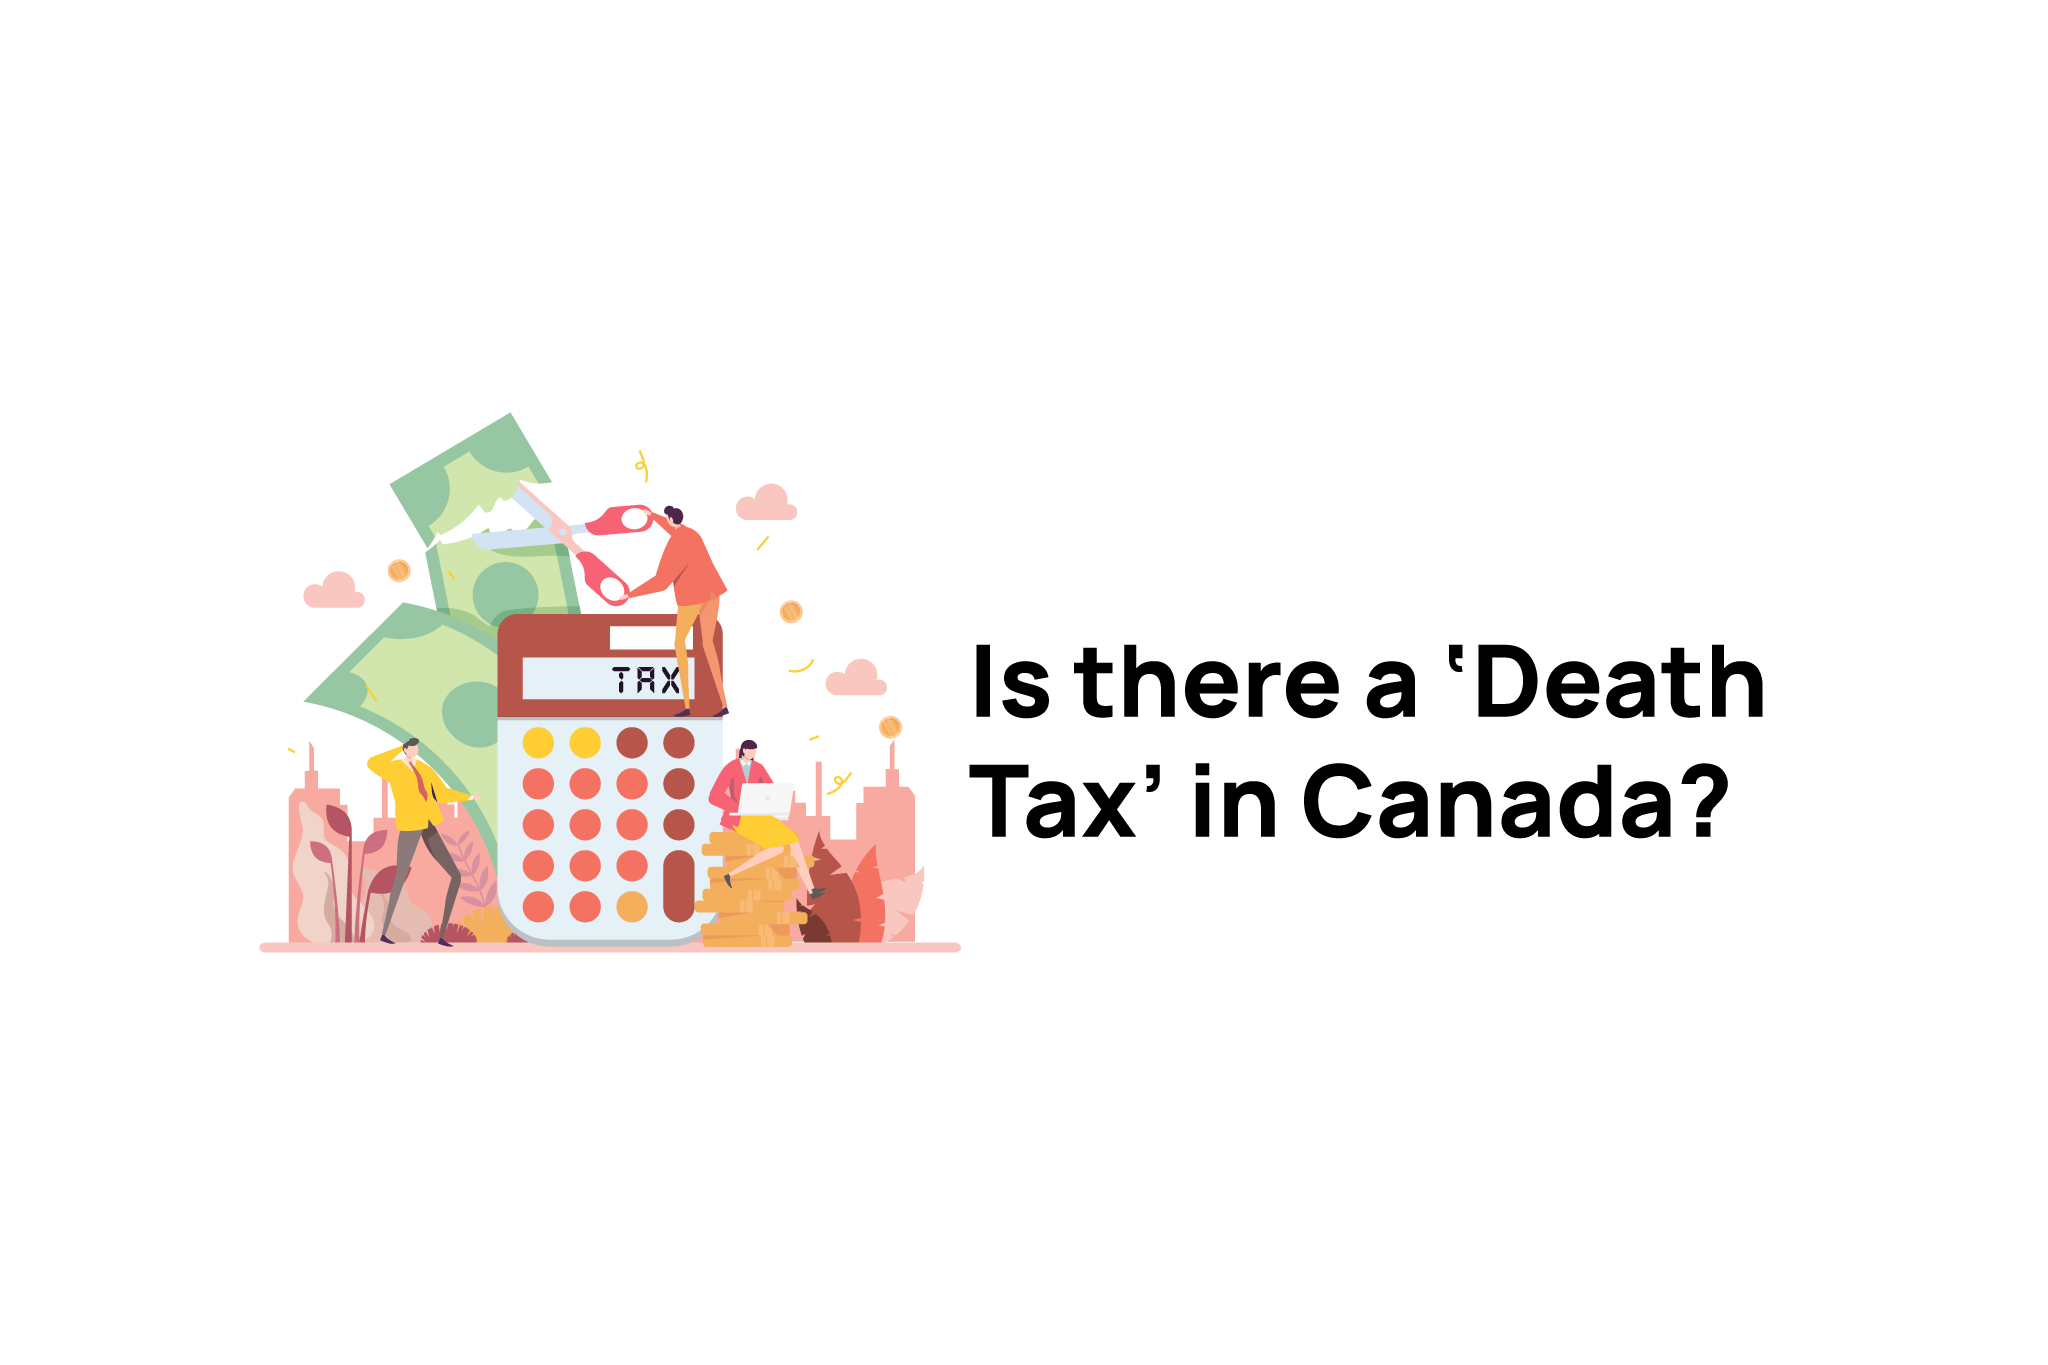 Is there a ‘Death Tax’ in Canada?